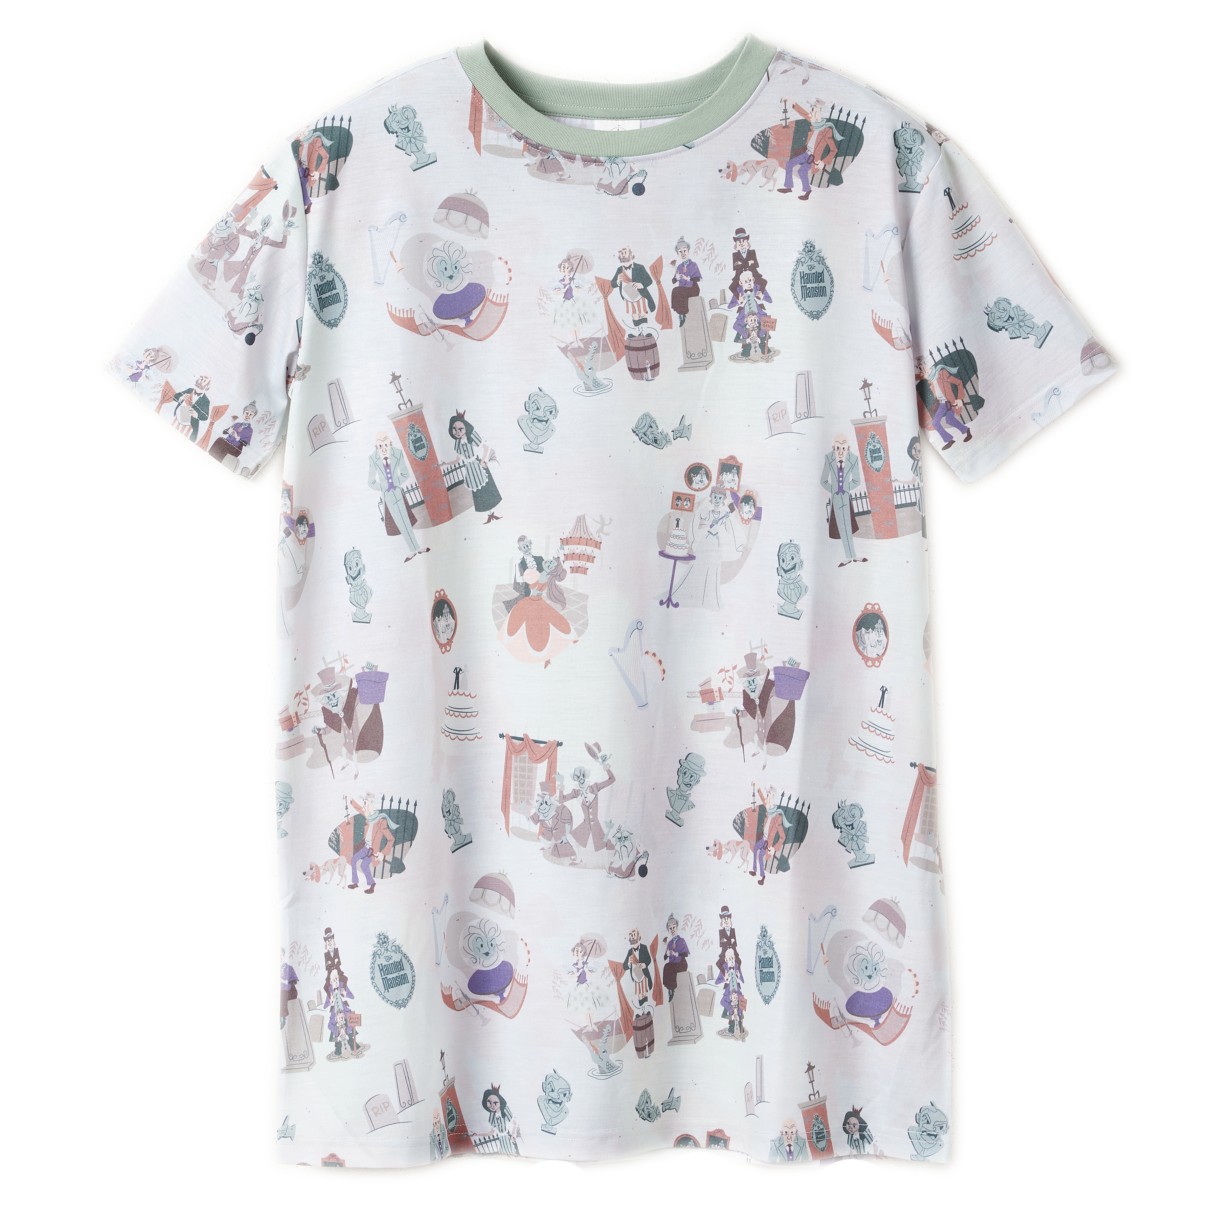 The Haunted Mansion Sleep Shirt for Adults